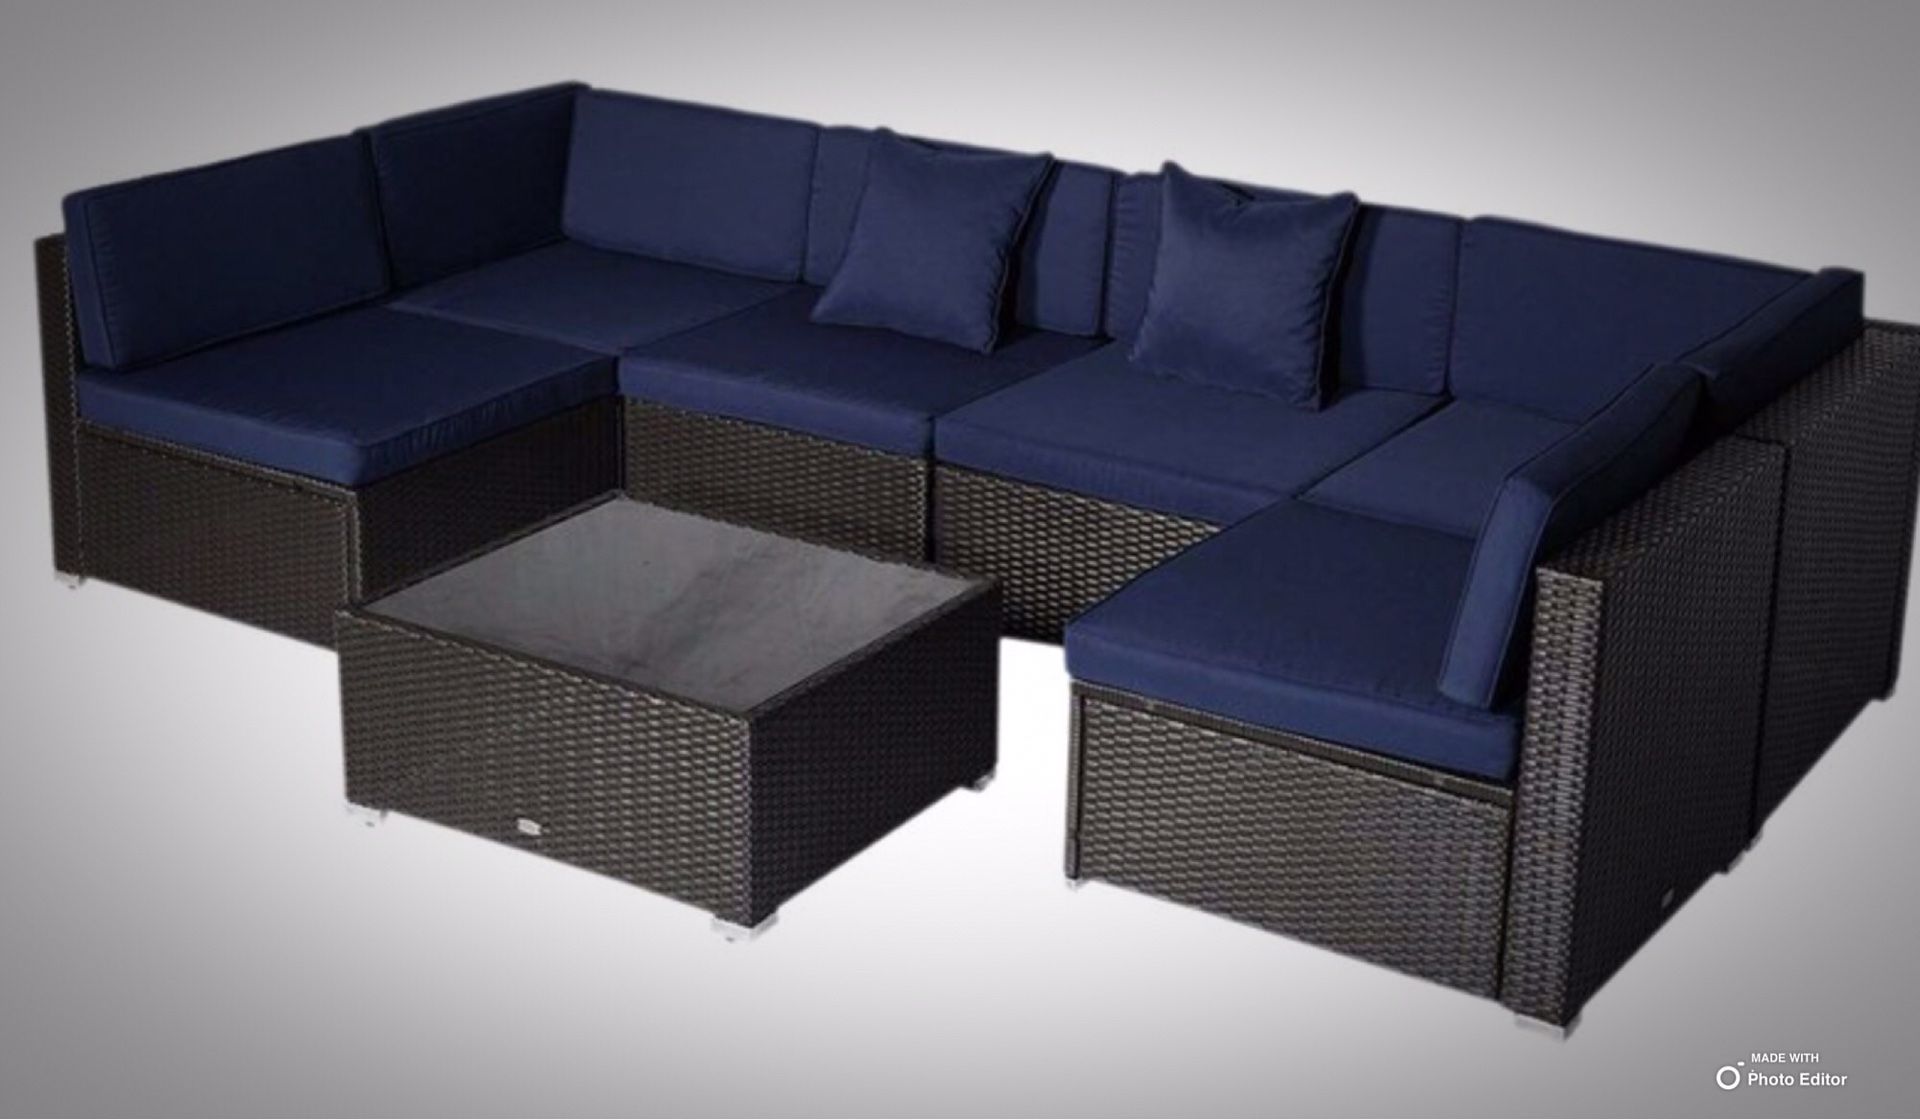 New!! Sectional set, porch set, balcony set, conversation set, 7 pc coffee table outdoor sectional set, garden furniture, outdoor sectional set